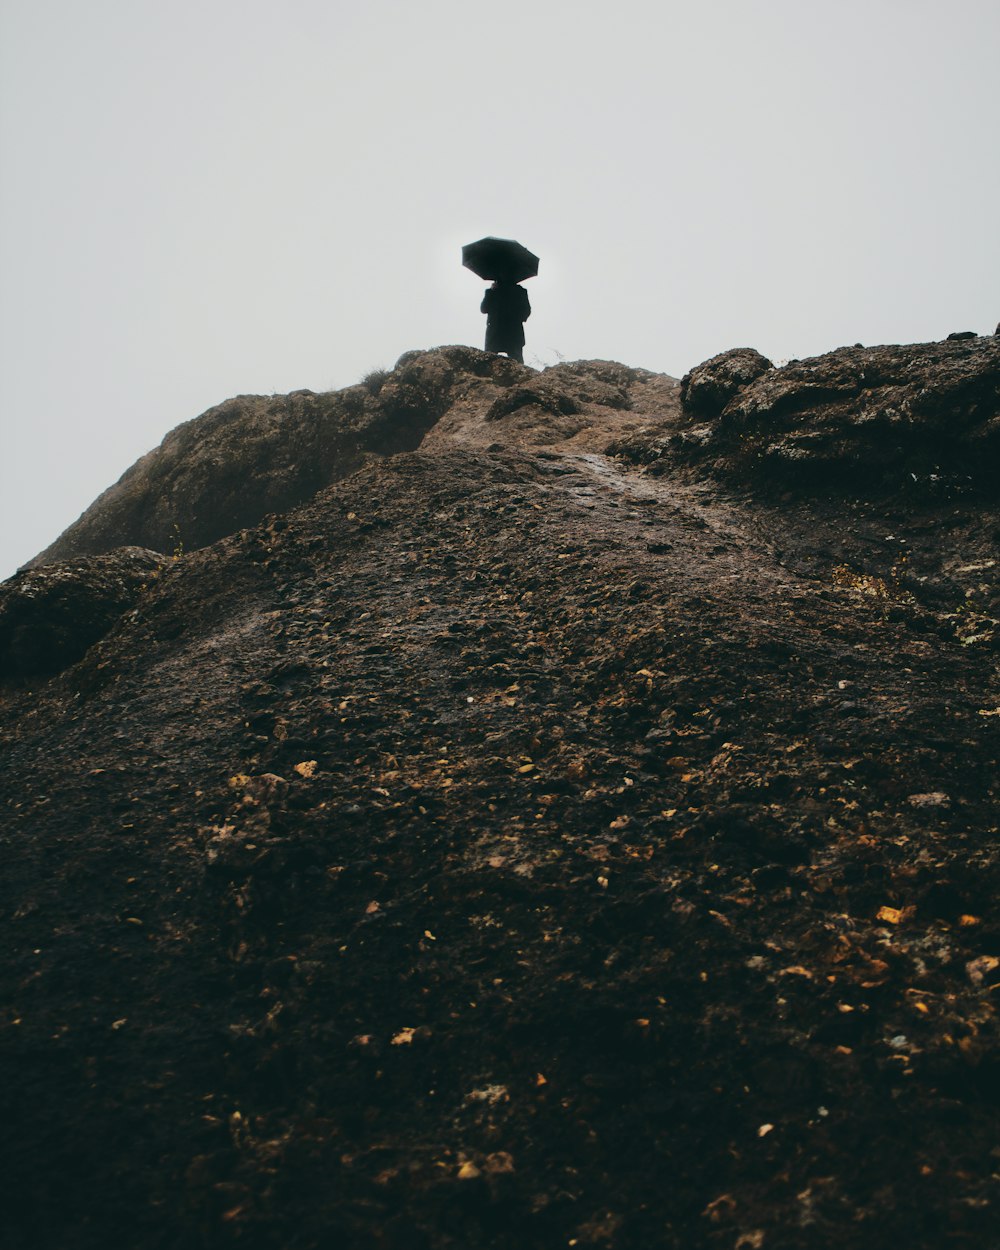 silhouette of person standing on hill holding umbrella